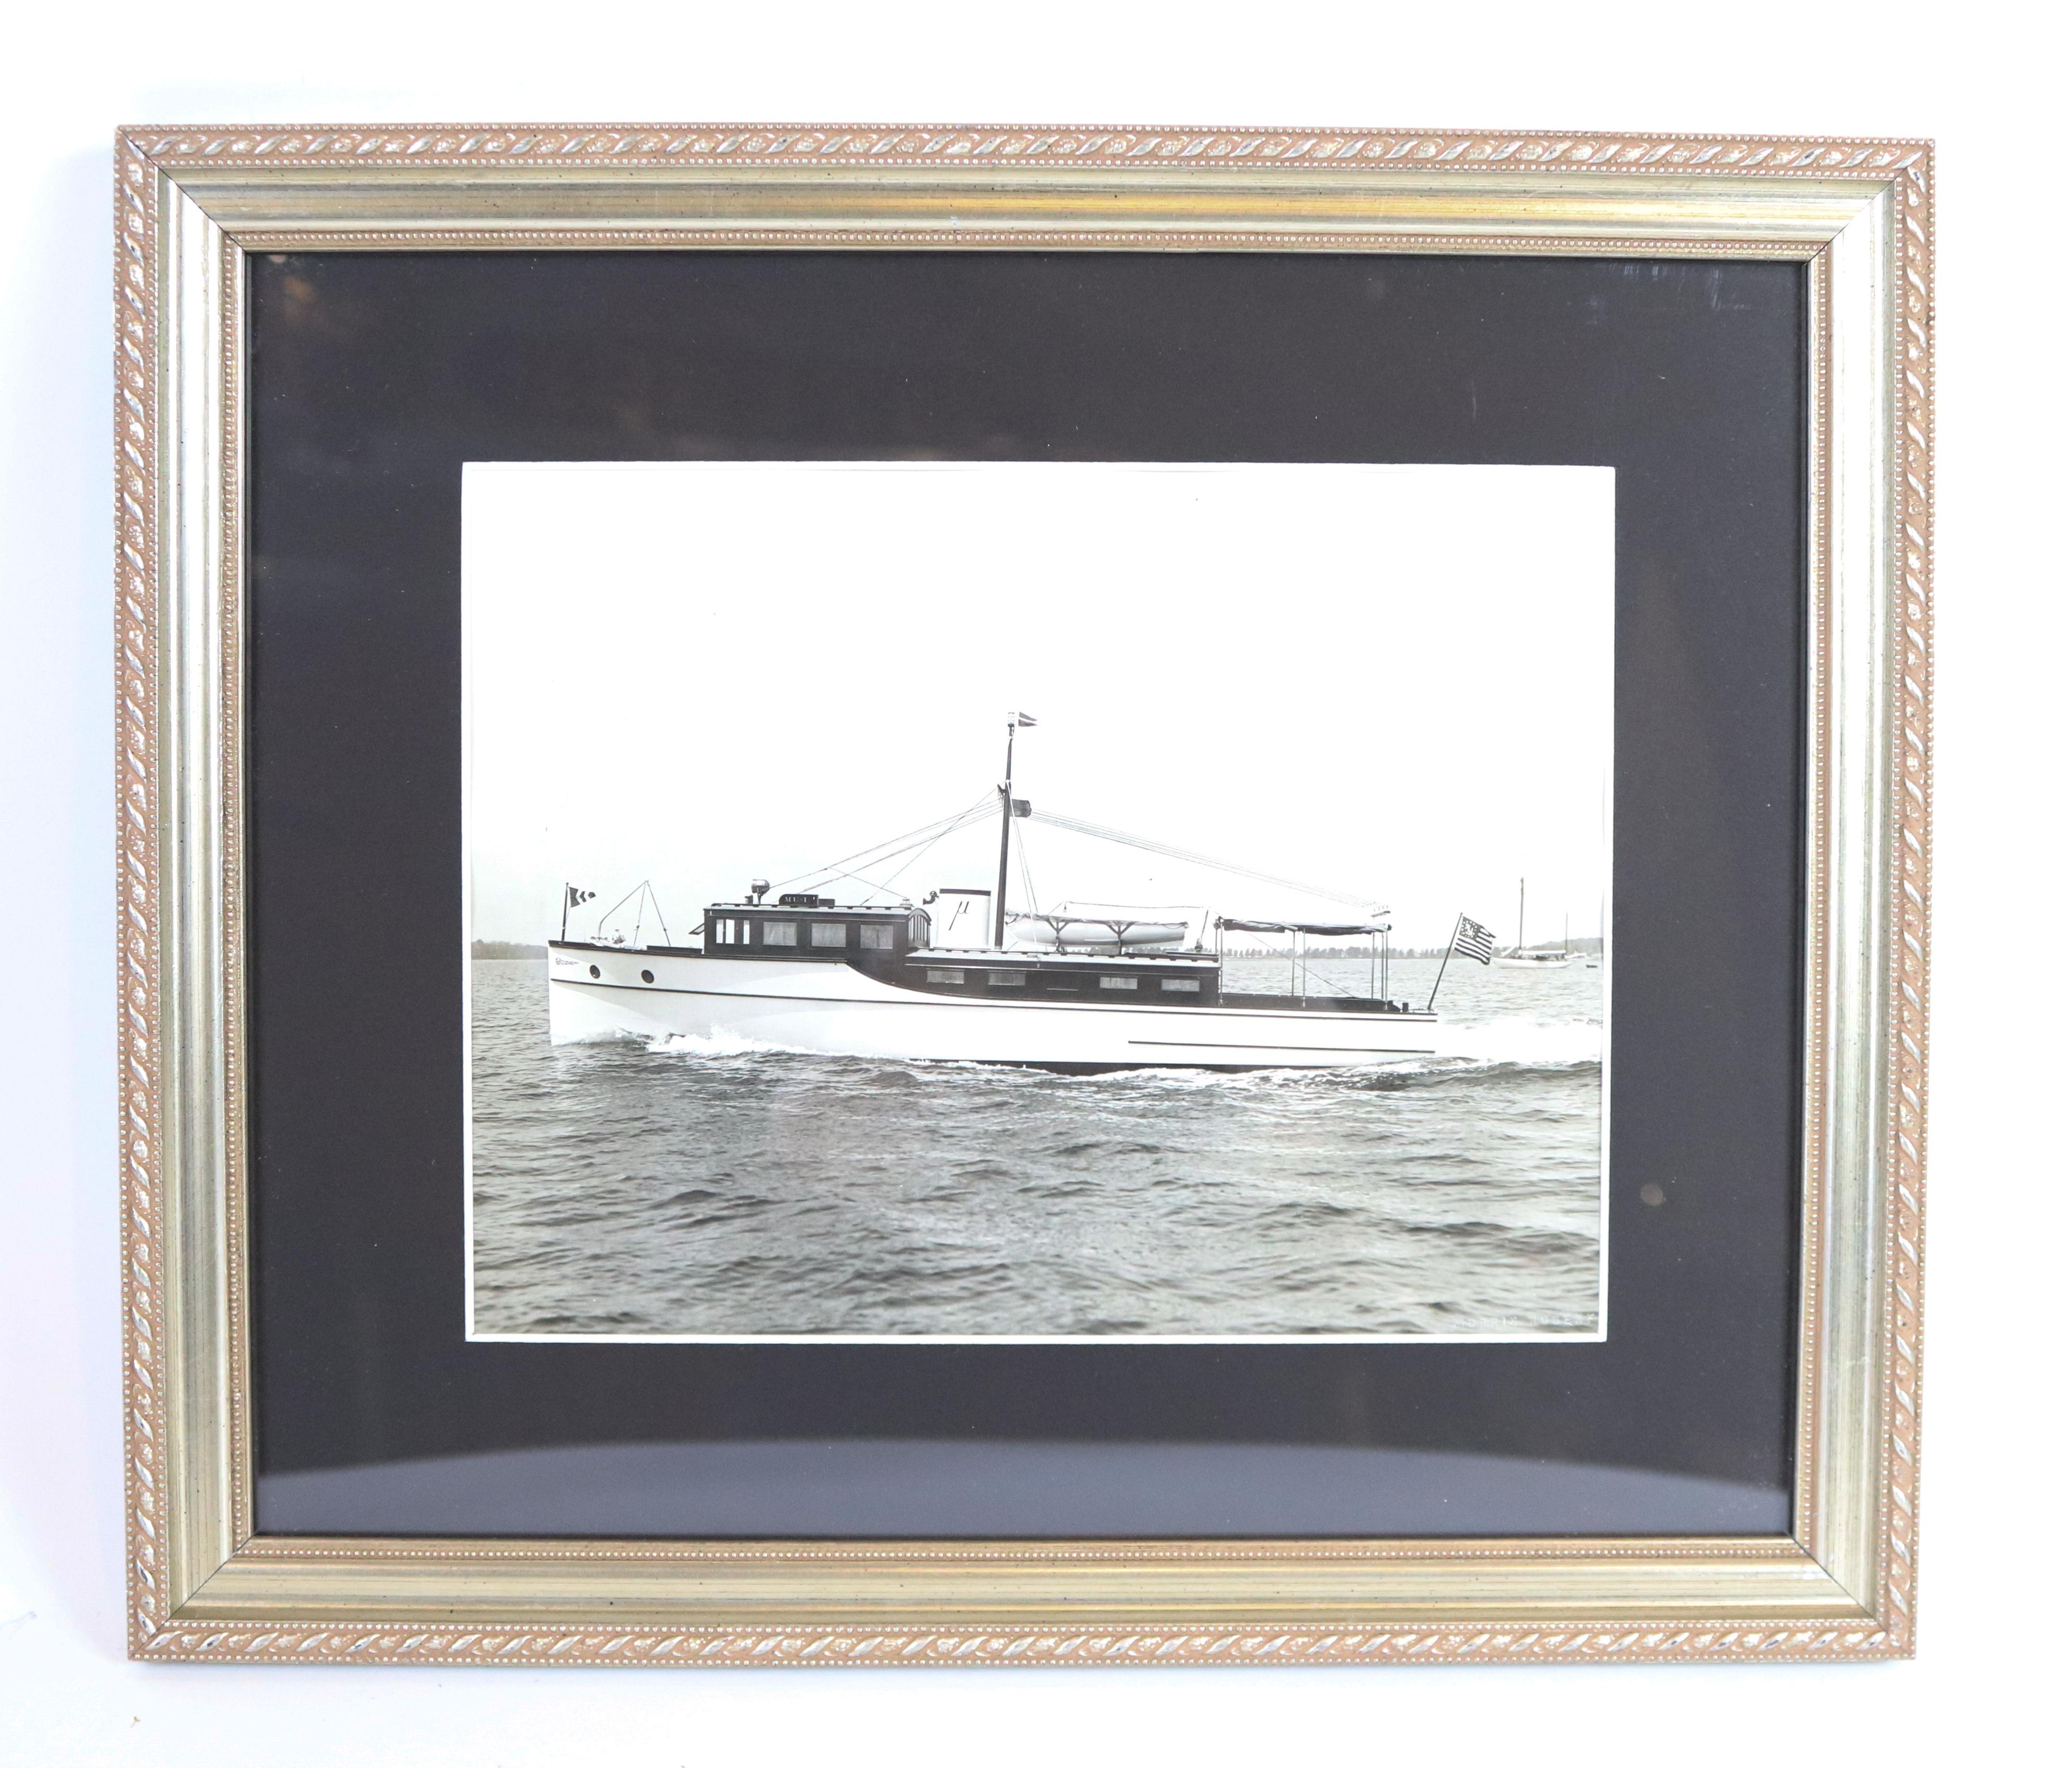 Original black and white press photo from the 1920s of Douglas Rigney's yacht MU-1. Matted and framed. 12 1/2 x 15. Rigney was vice president of A.H. Grebe, pioneers of radio broadcasting. The MU-1 is named for their station WMUR. She flew the